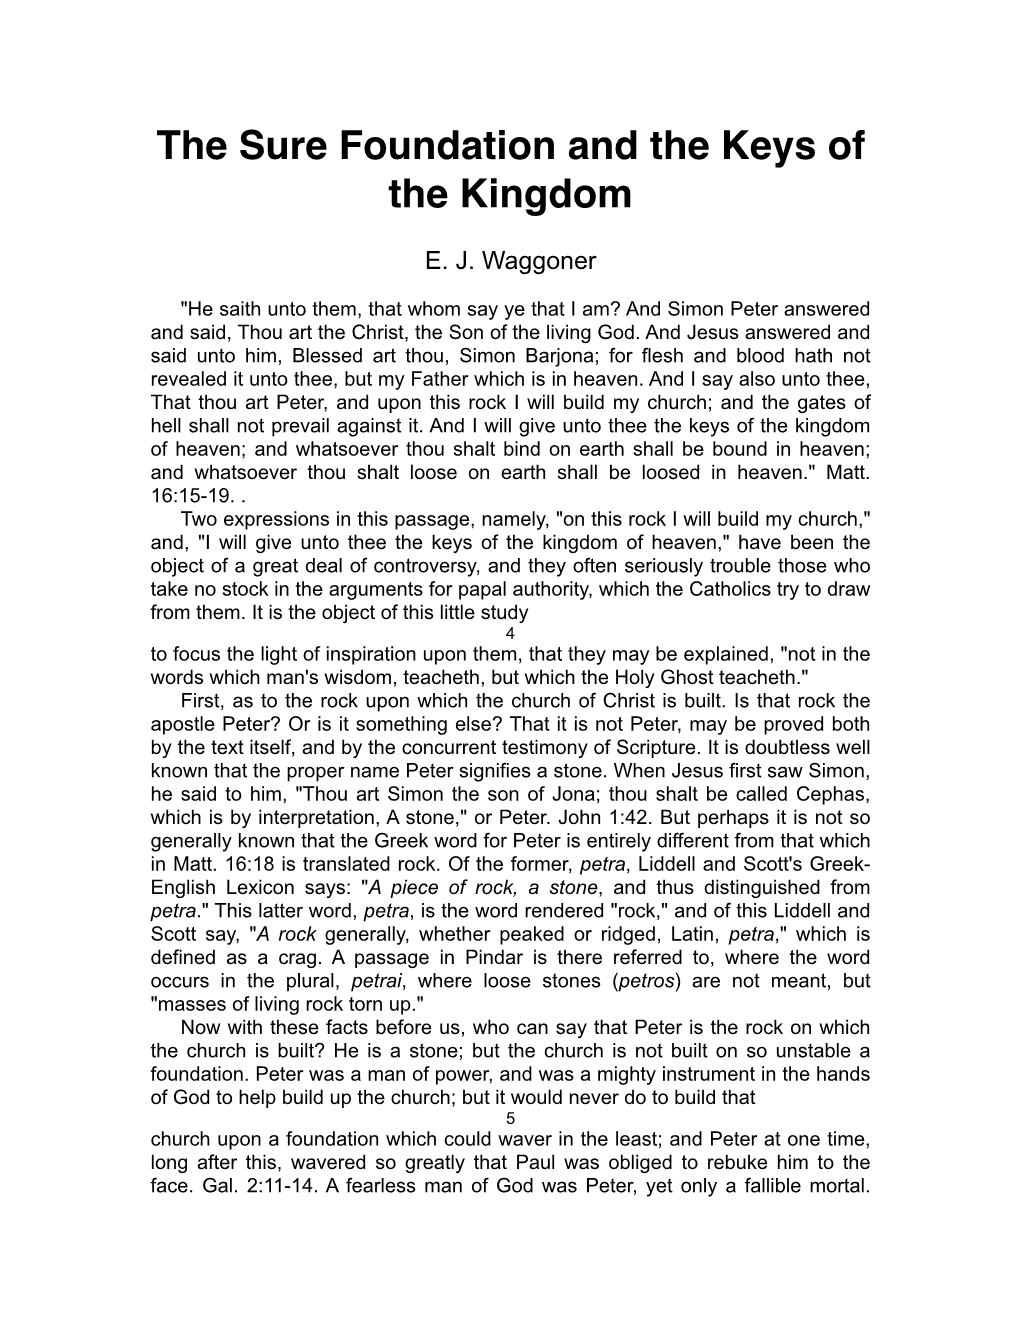 The Sure Foundation and the Keys of the Kingdom